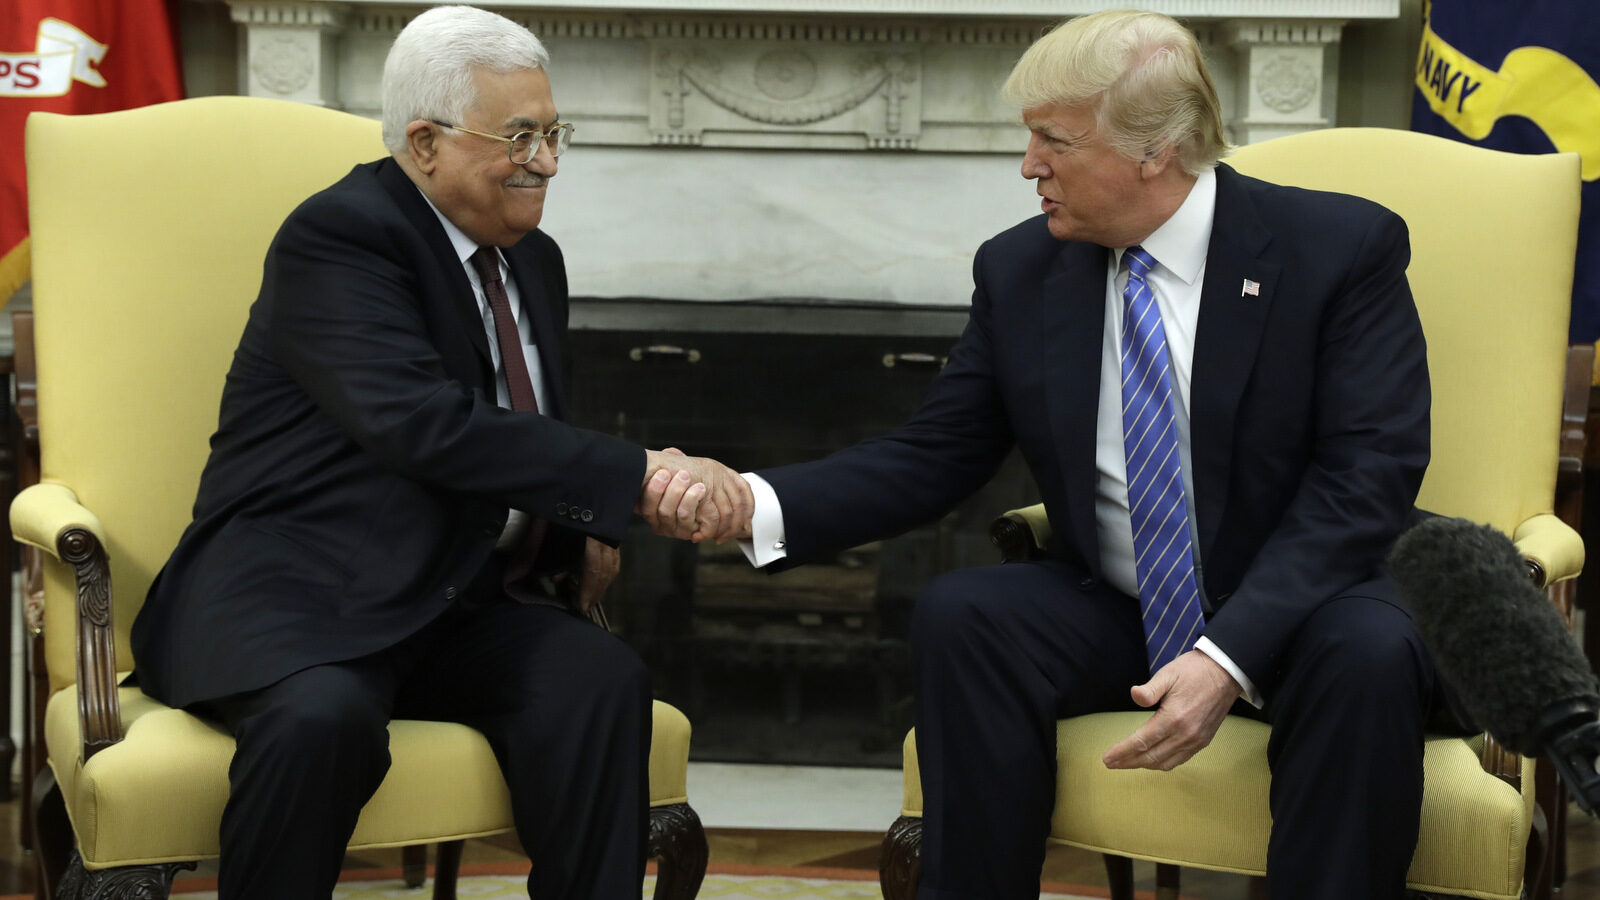 President Donald Trump shakes hands with with Palestinian leader Mahmoud Abbas during their meeting in the Oval Office of the White House, Wednesday, May 3, 2017, in Washington. (AP/Evan Vucci)